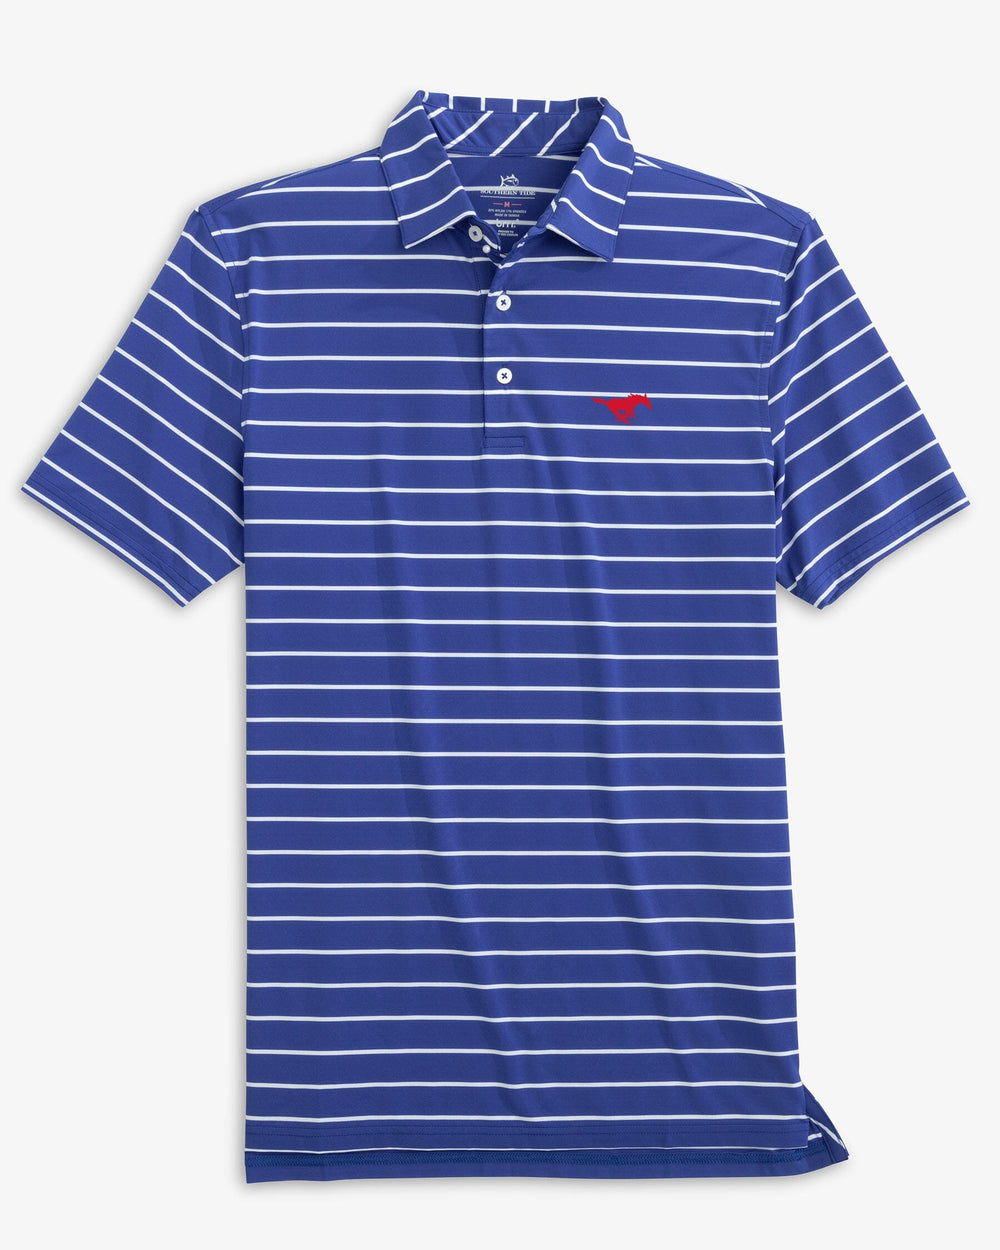 The front view of the SMU Mustangs Brreeze Desmond Stripe Performance Polo by Southern Tide - University Blue